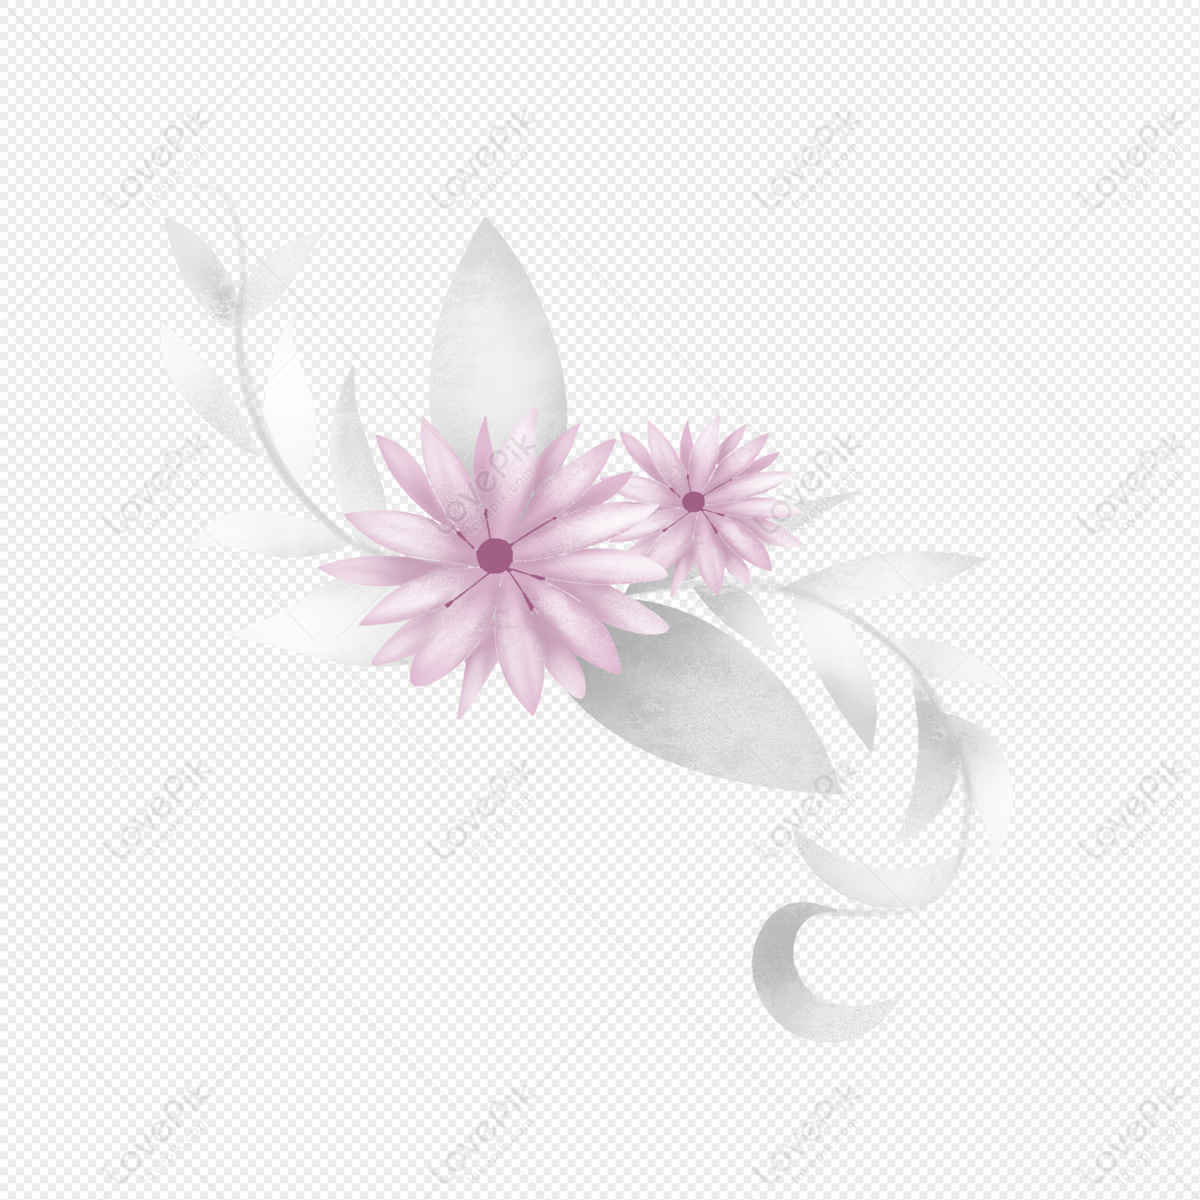 Decorative Plant PNG Picture And Clipart Image For Free Download ...